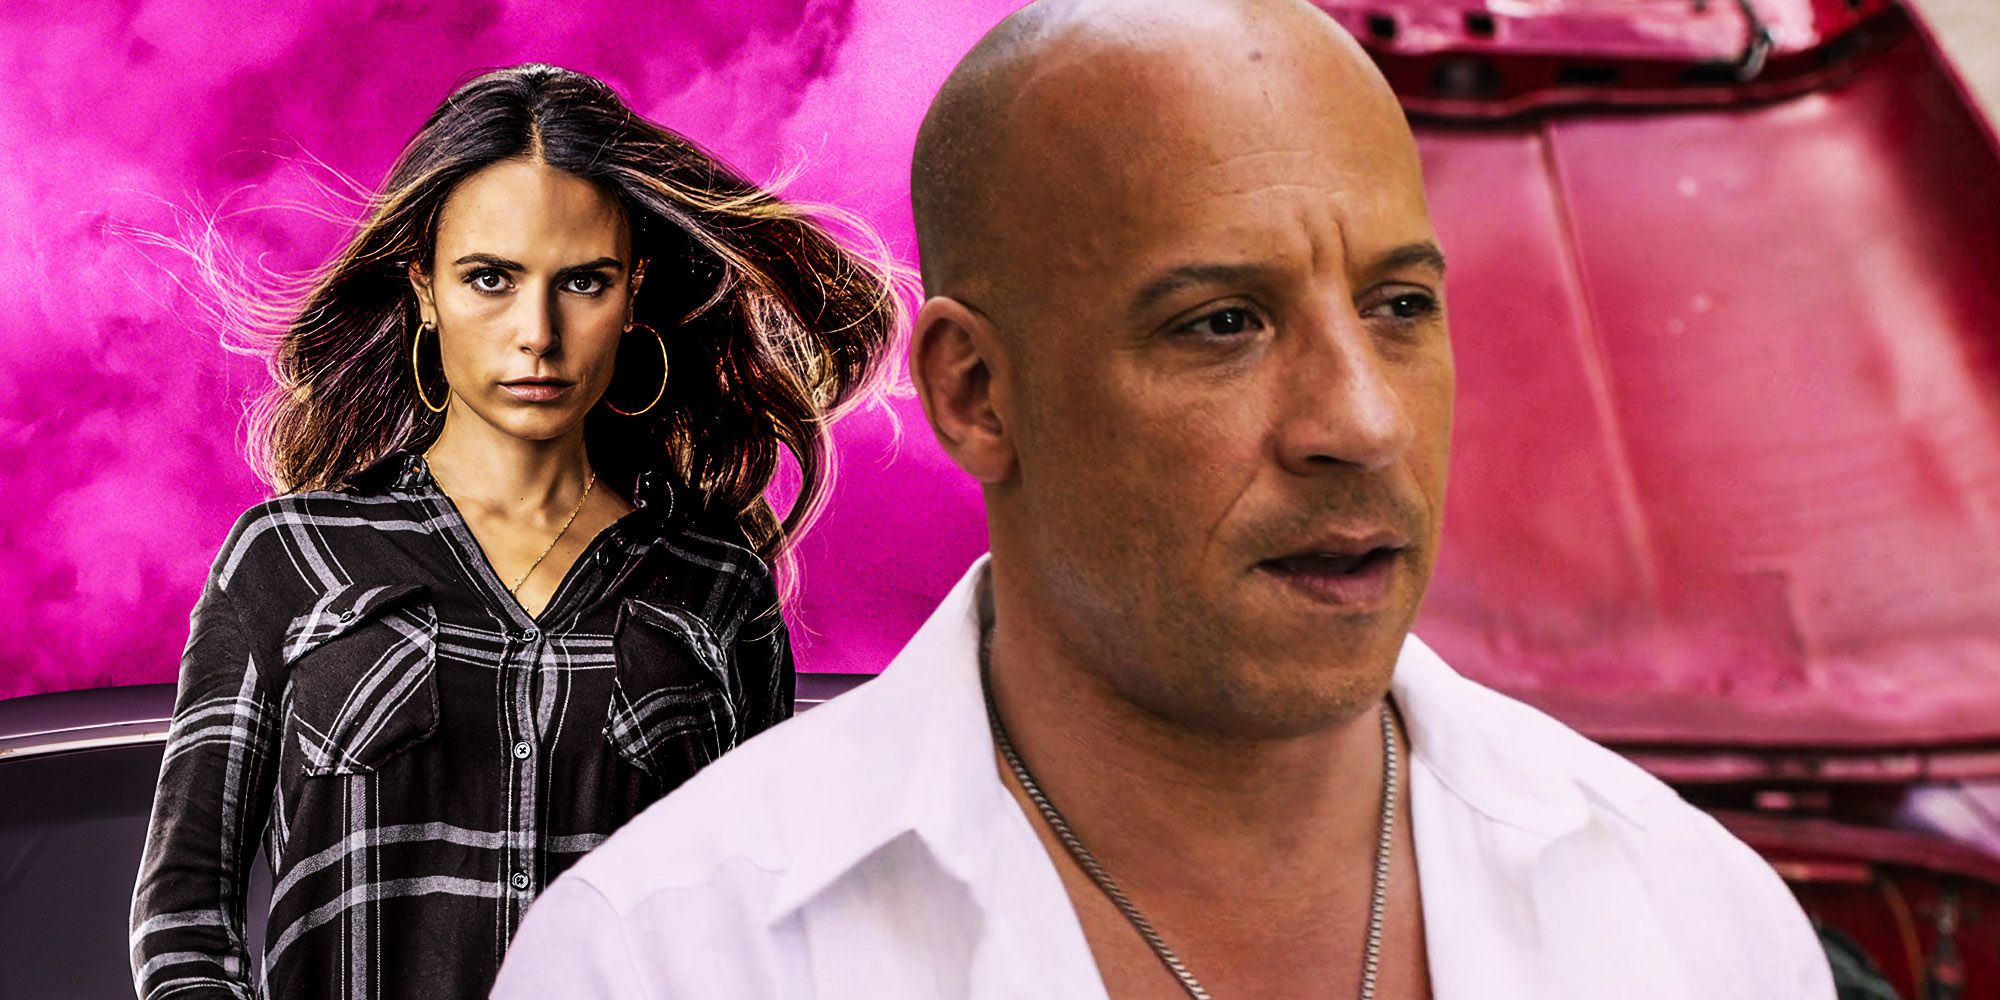 dominic mia toretto Mother Fast and furious 10